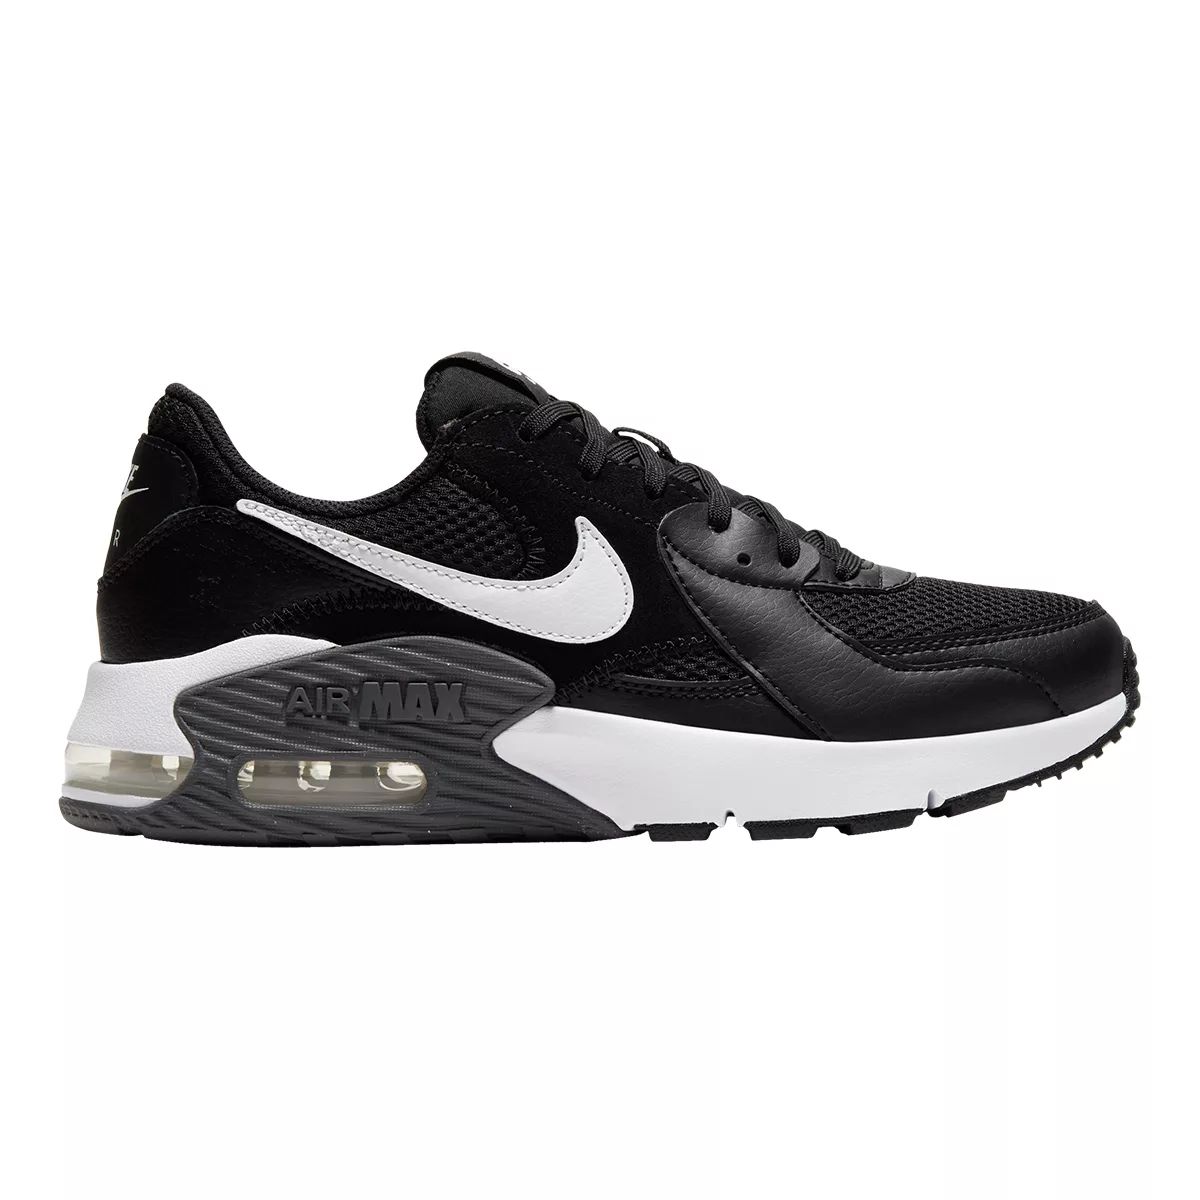 Vinegar Review valley Nike Women's Air Max Excee Shoes Sneakers Cushioned Lightweight | Upper  Canada Mall